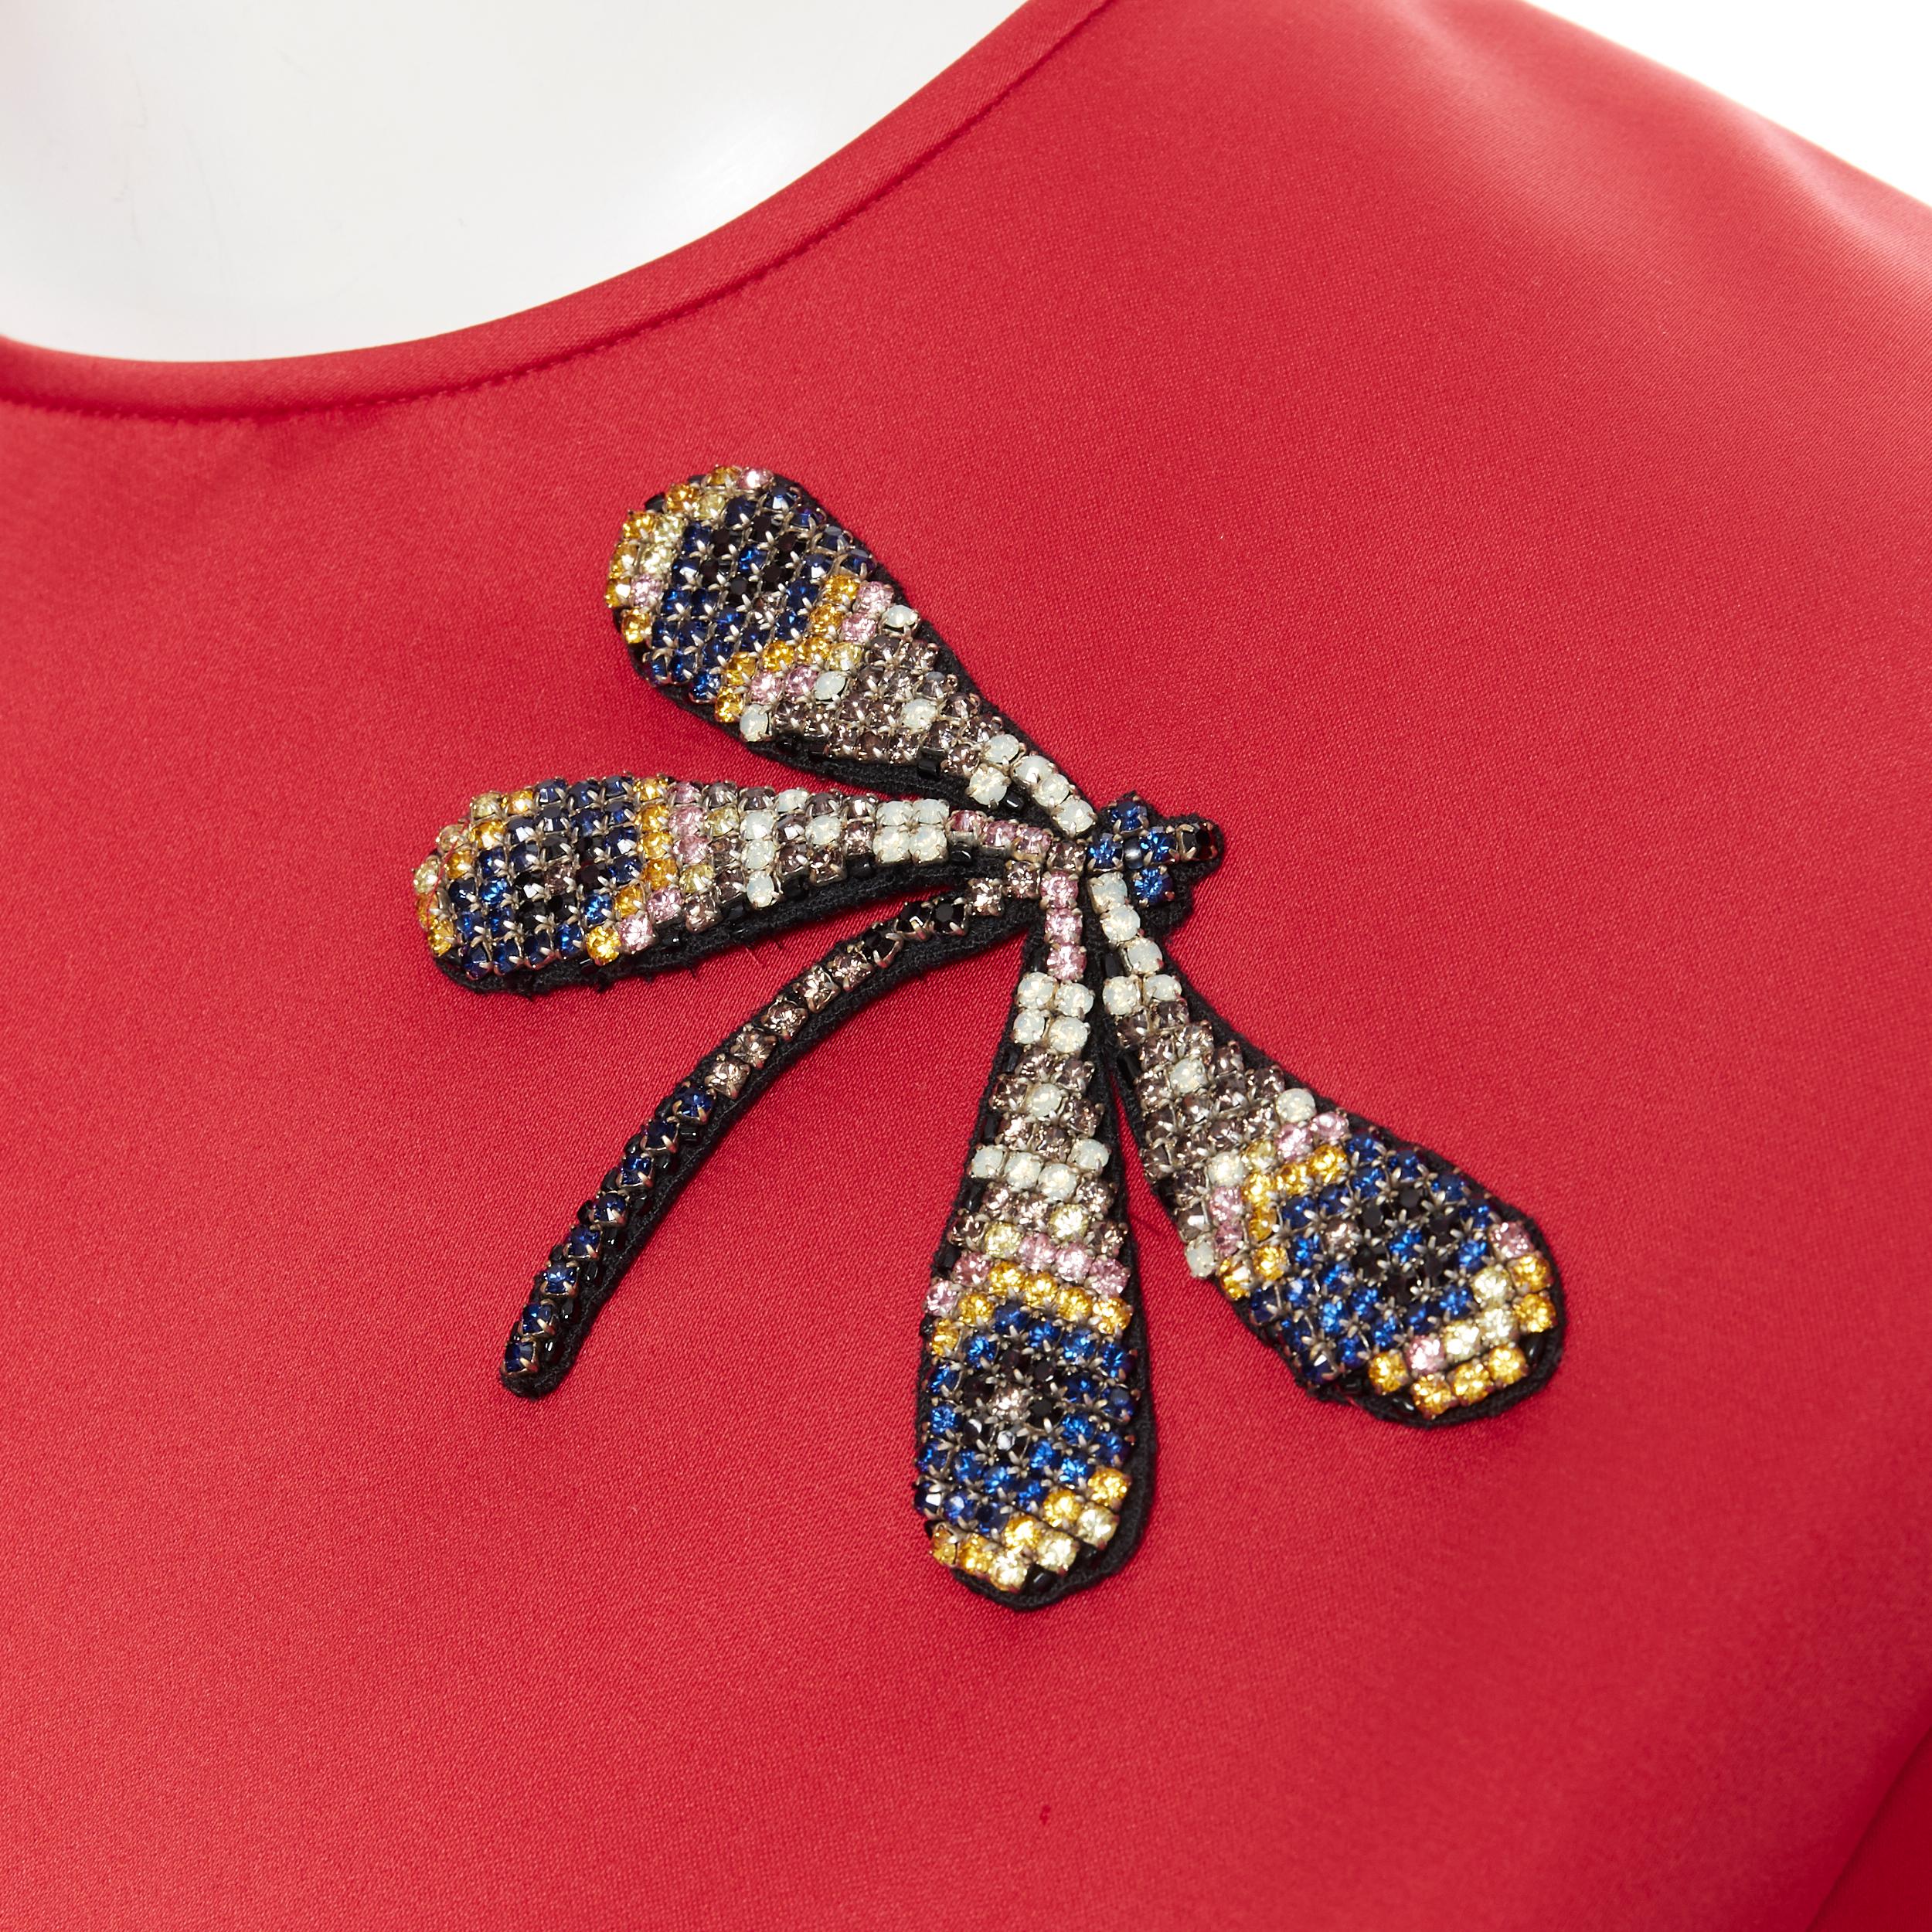 ROCHAS dragonfly crystal embellished red polyester short sleeve boxy top IT38 XS
Brand: Rochas
Model Name / Style: Boxy top
Material: Polyester
Color: Red
Pattern: Solid
Closure: Button
Extra Detail: Crystal dragonfly embroidery design. Boxy fit.